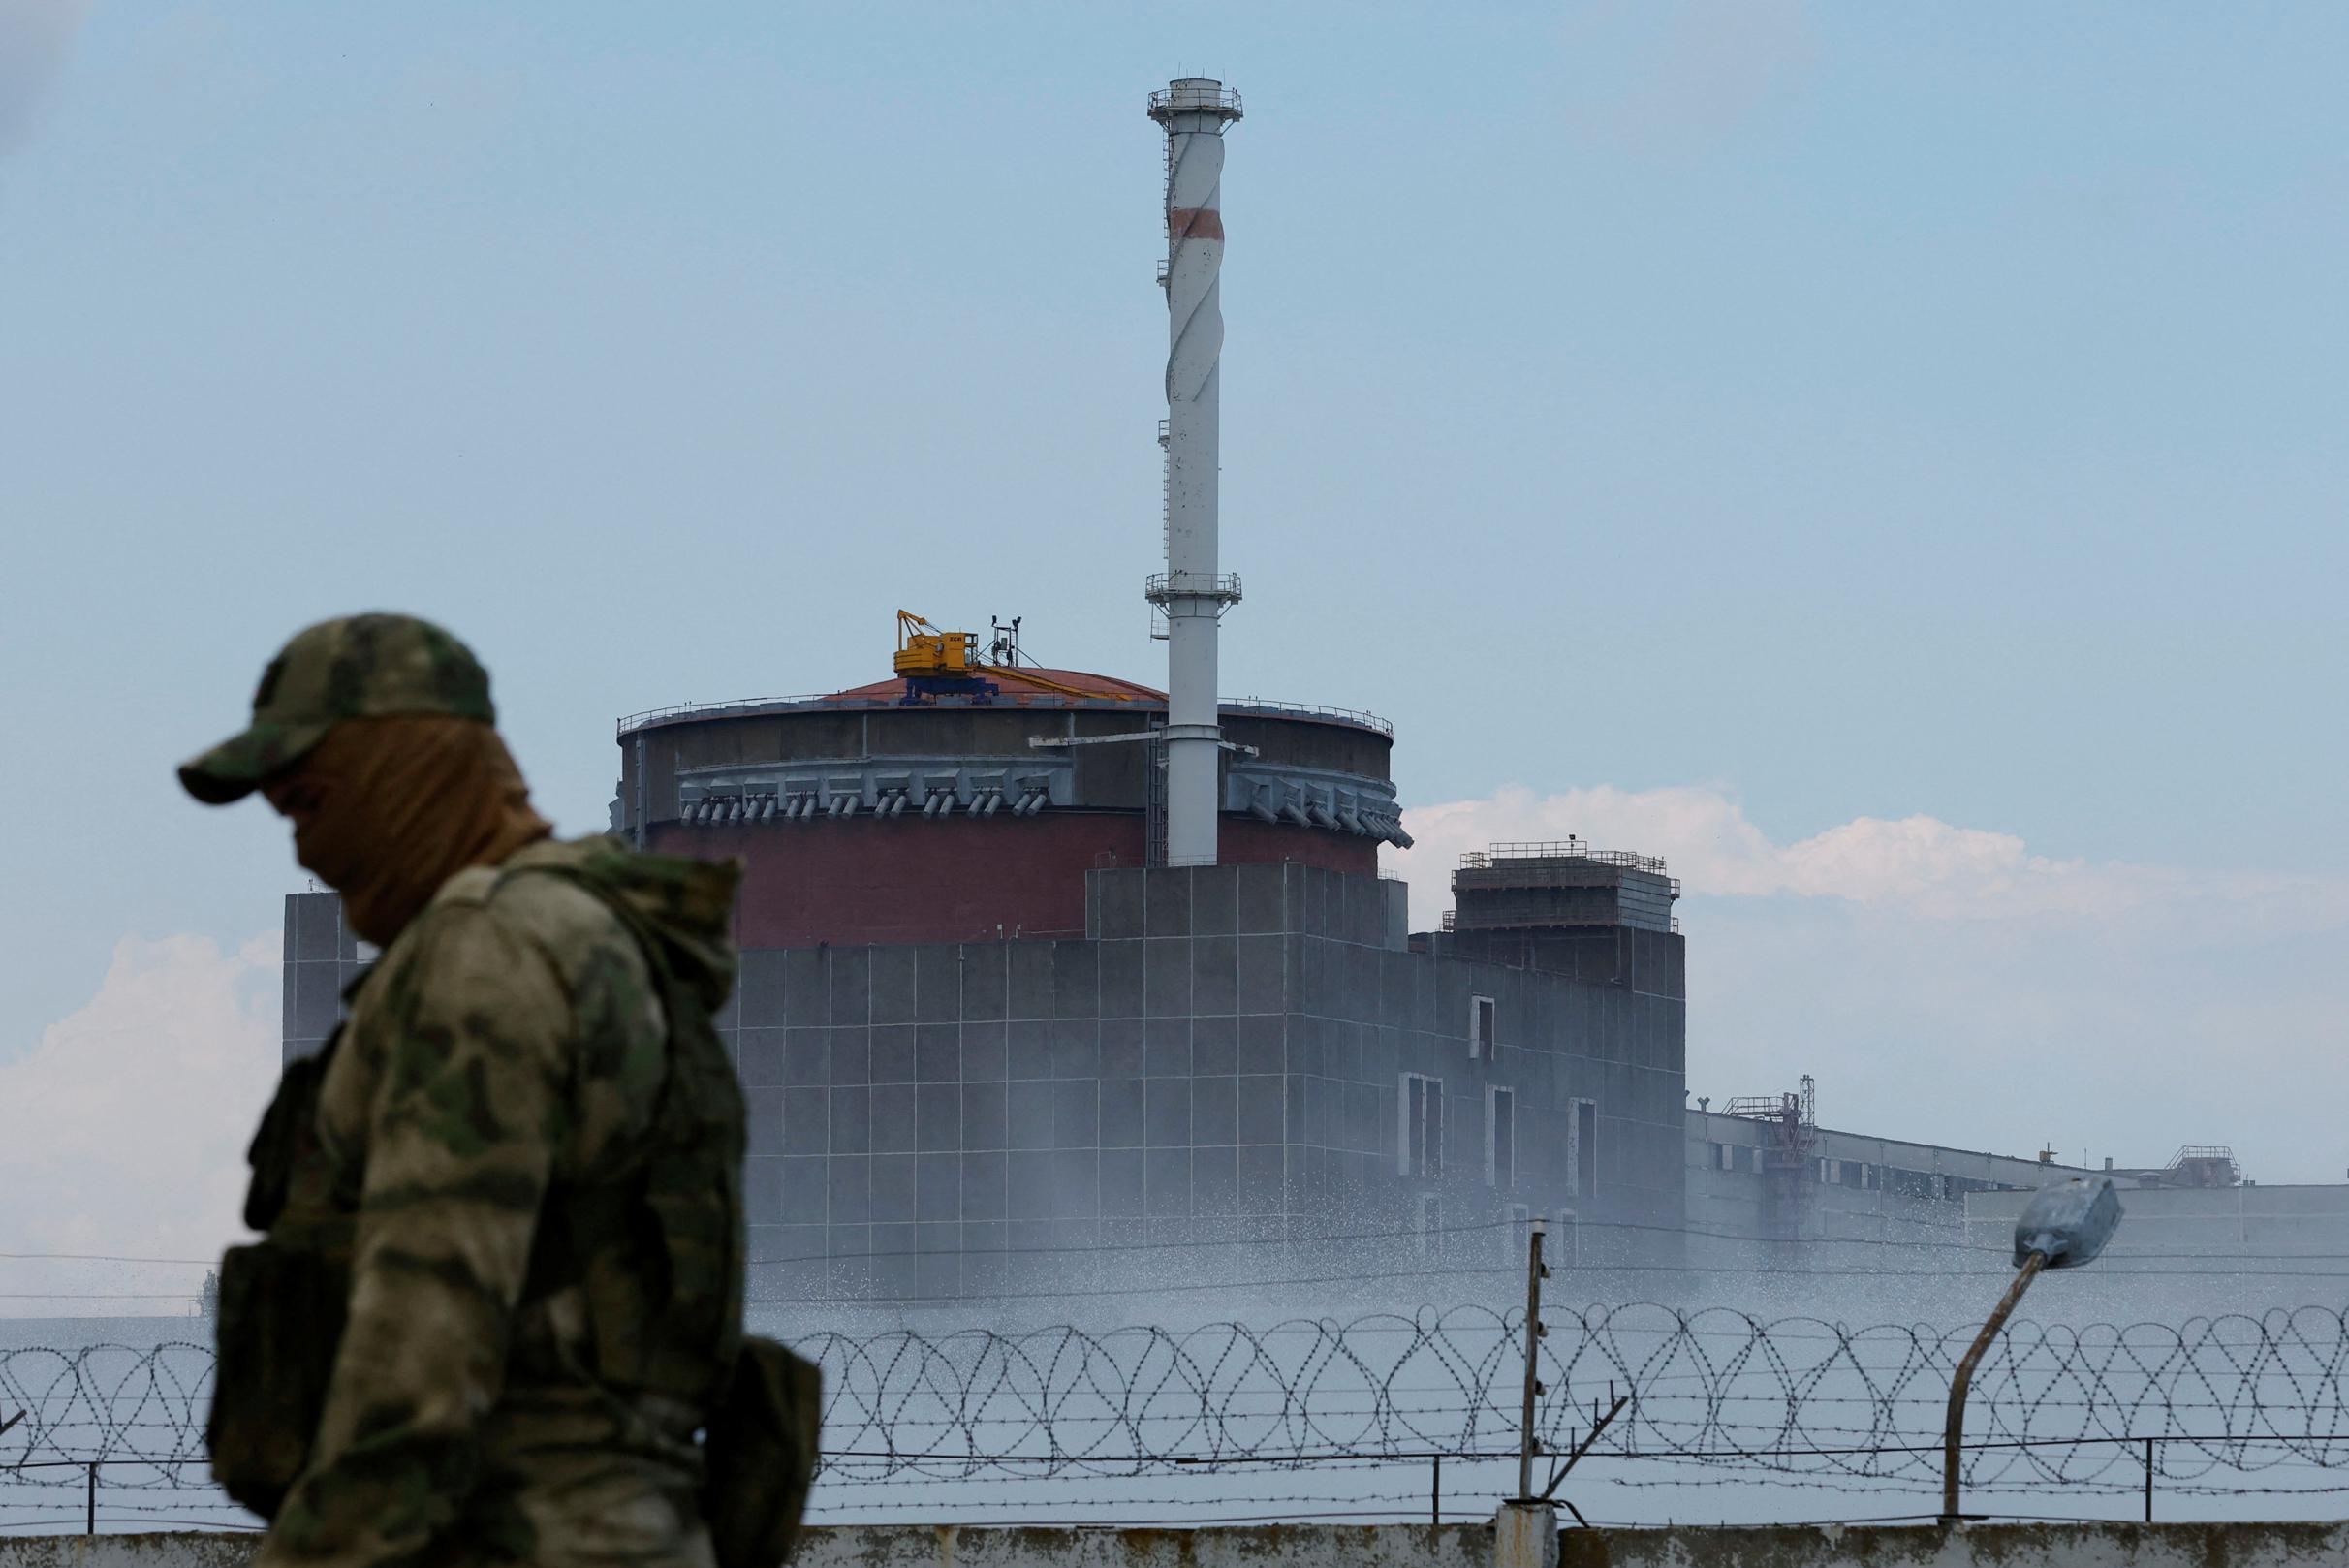 Atomic Energy Agency warns of “nuclear catastrophe” after shelling nuclear power plant in Ukraine